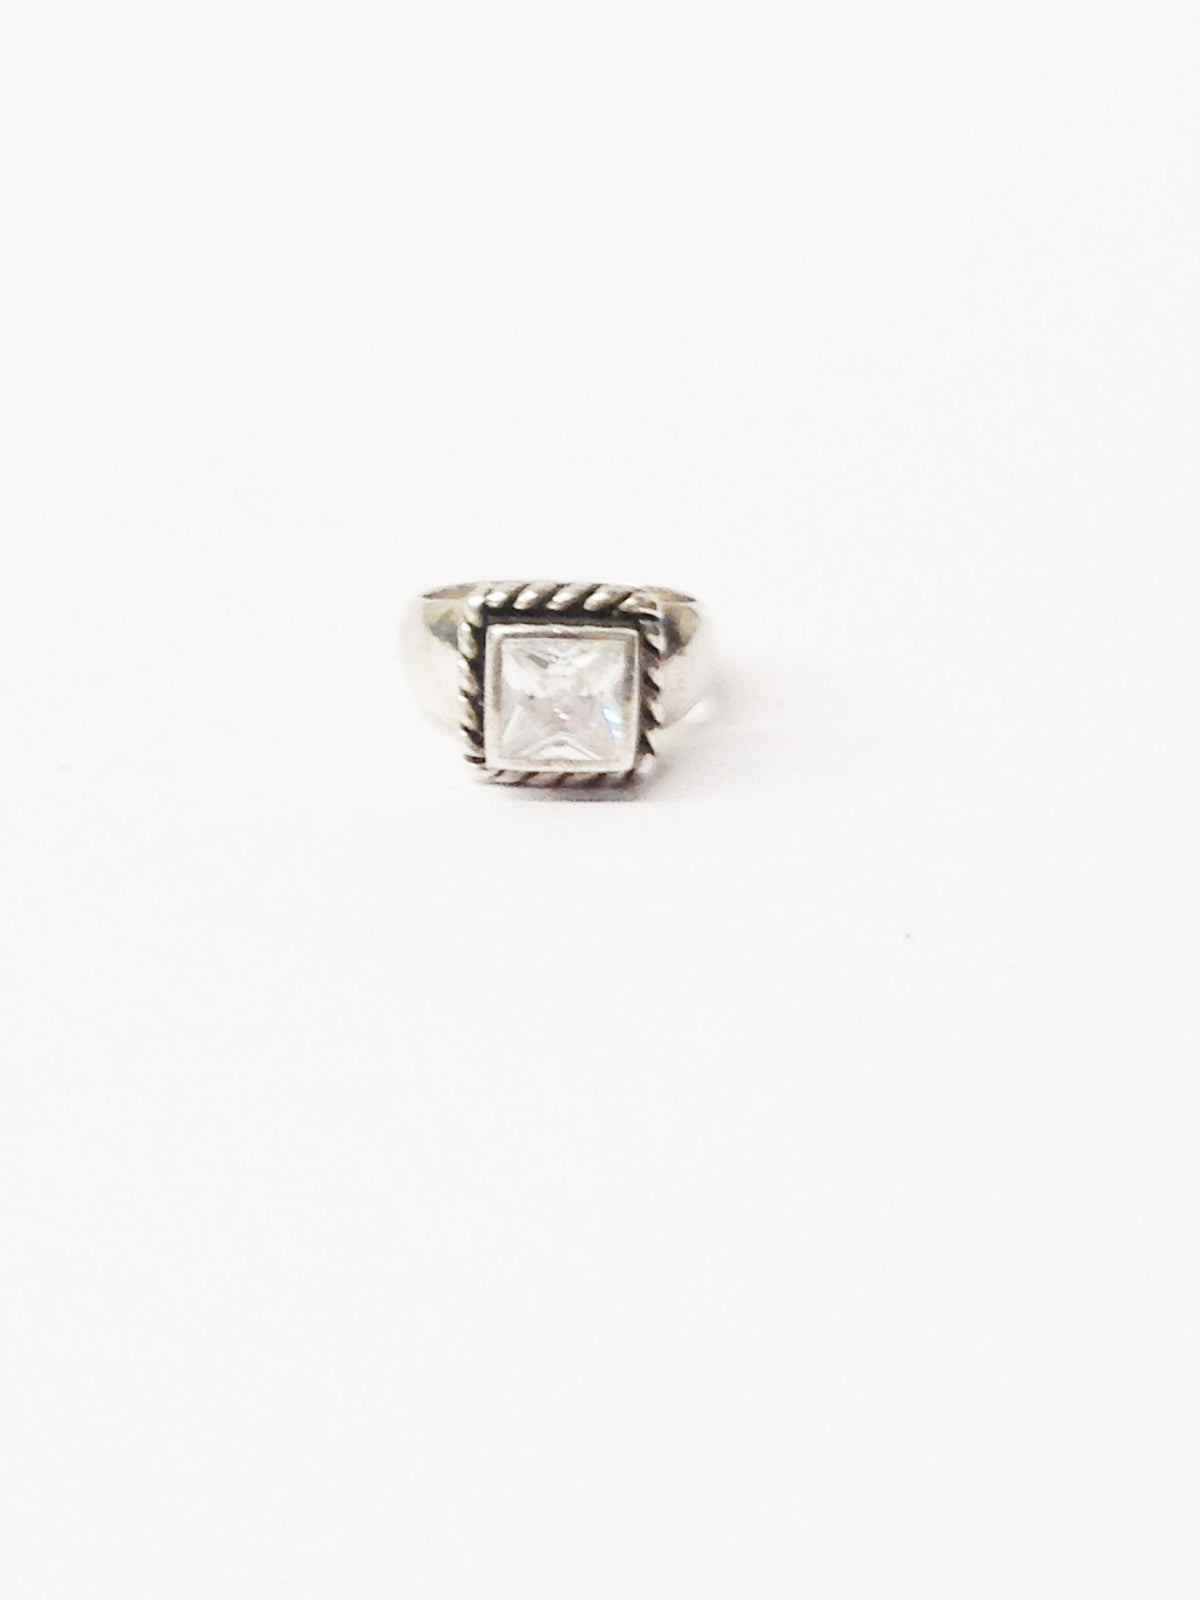 Silpada .925 Sterling Silver Square CZ Elizabeth Ring - Hers and His Treasures